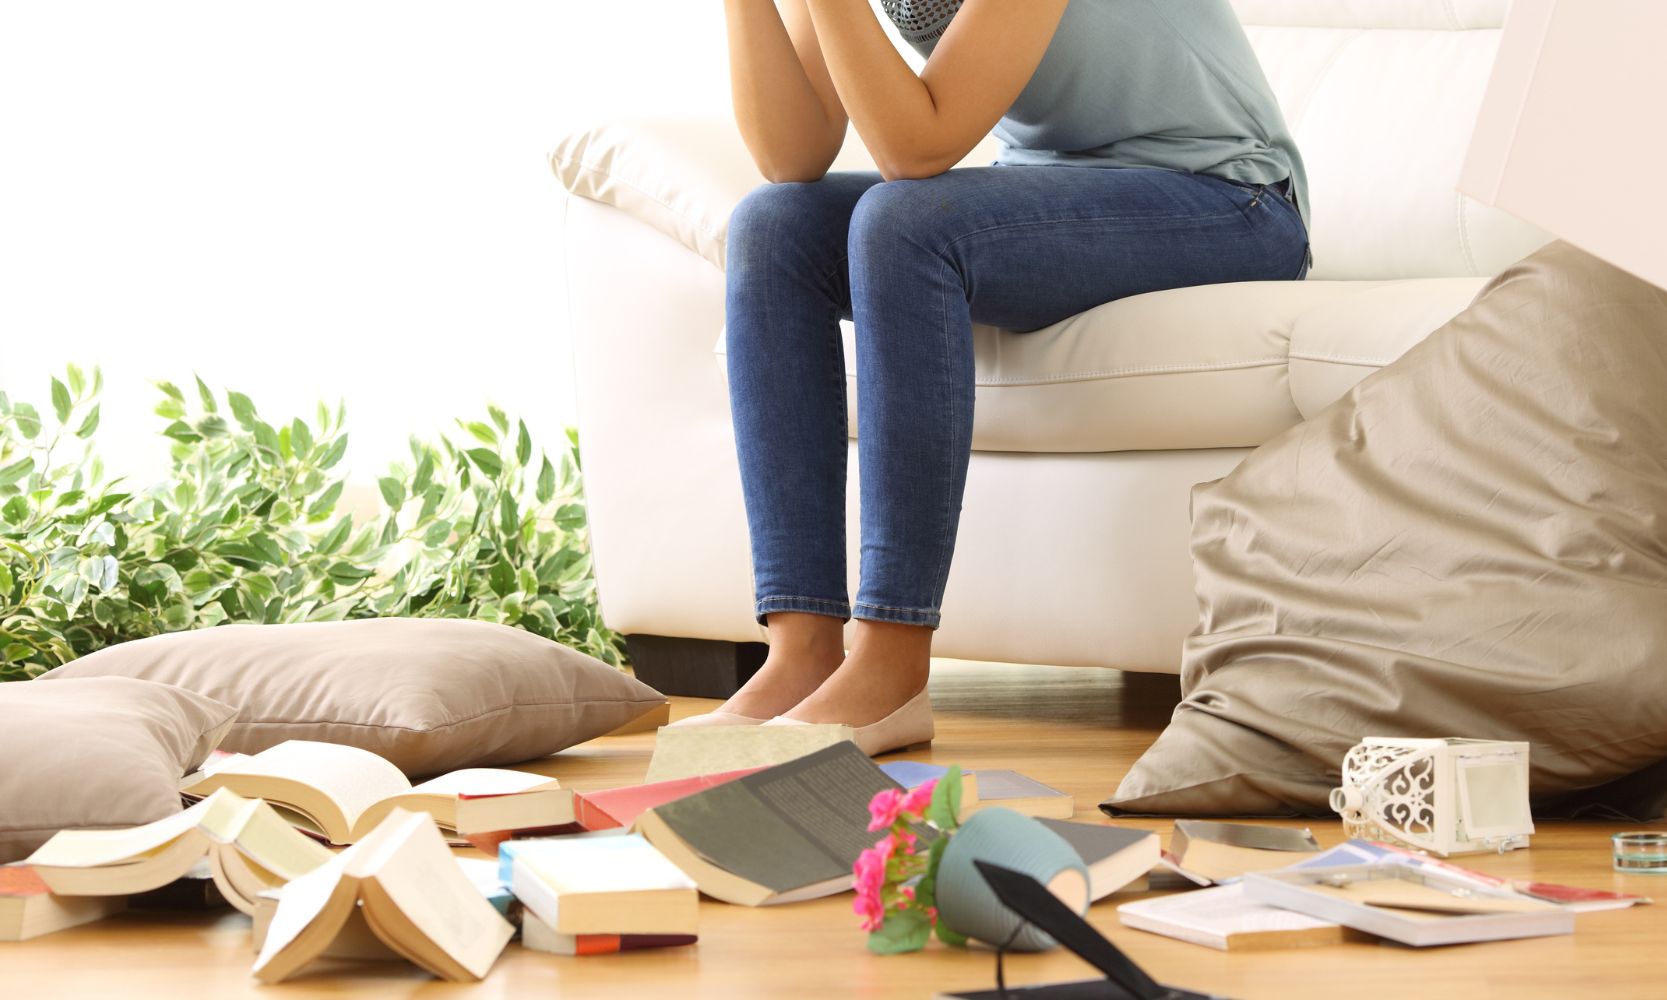 Image of a woman, holding her head, sad sitting on the couch while her apartment is damaged from a theft